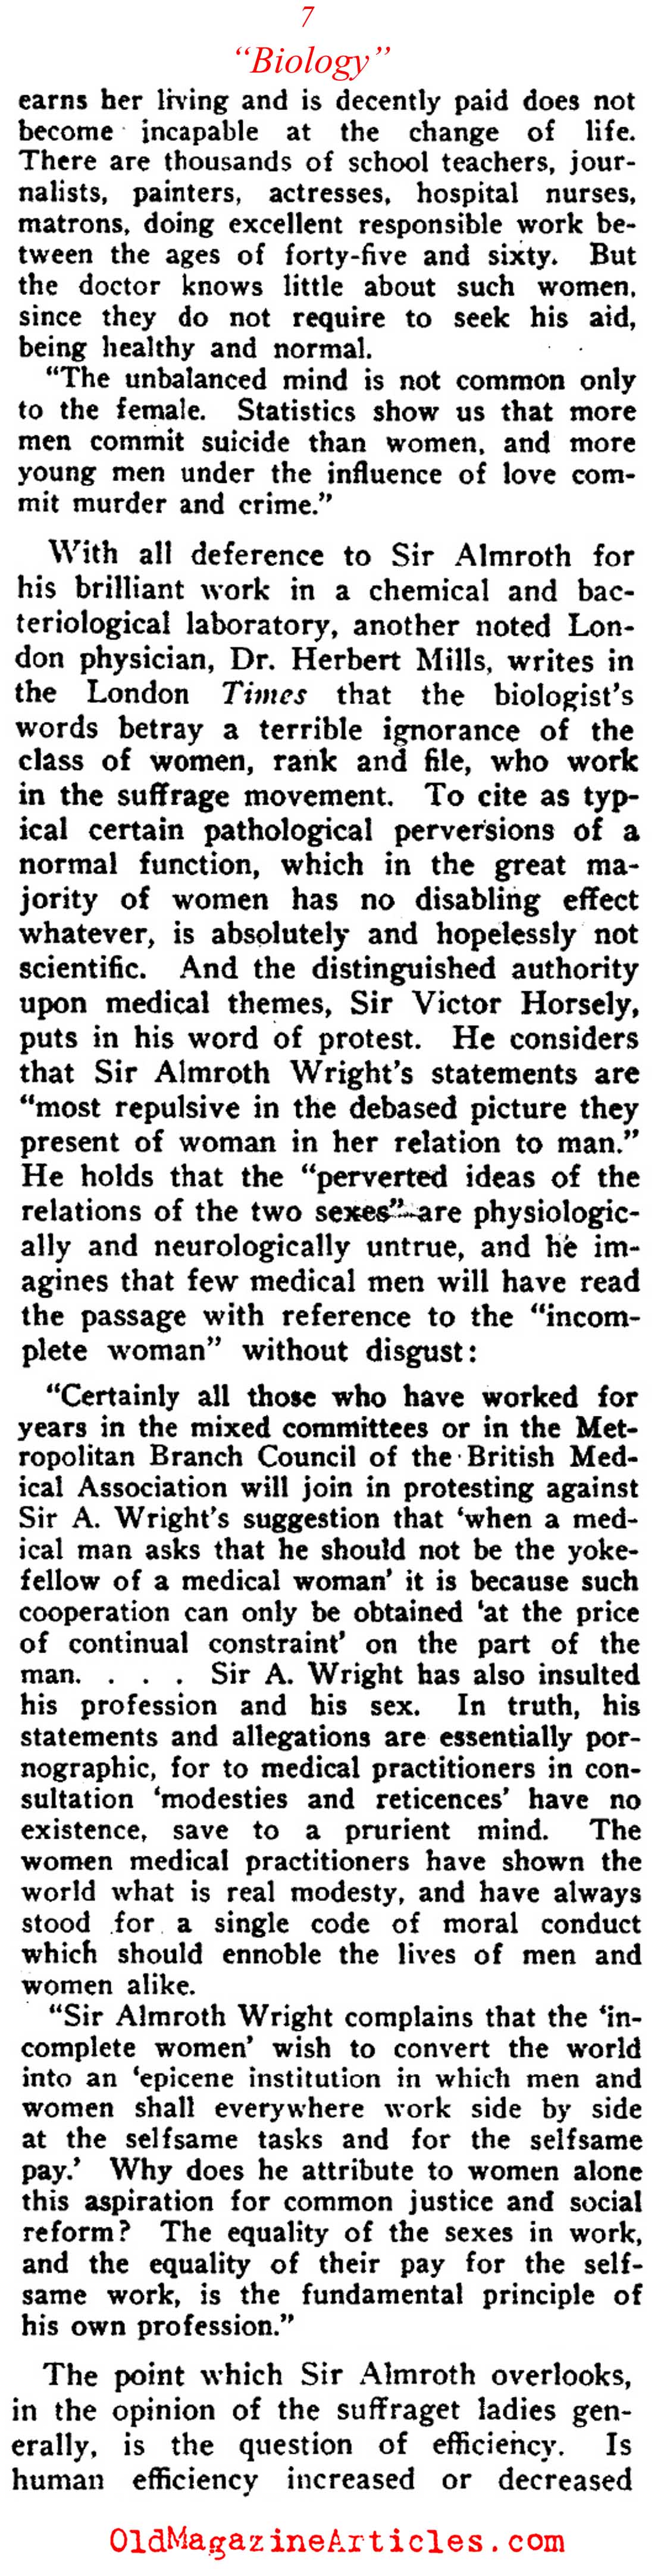 Scientific Proof  That Women Should Not Be Allowed to Vote (Current Opinion, 1912)